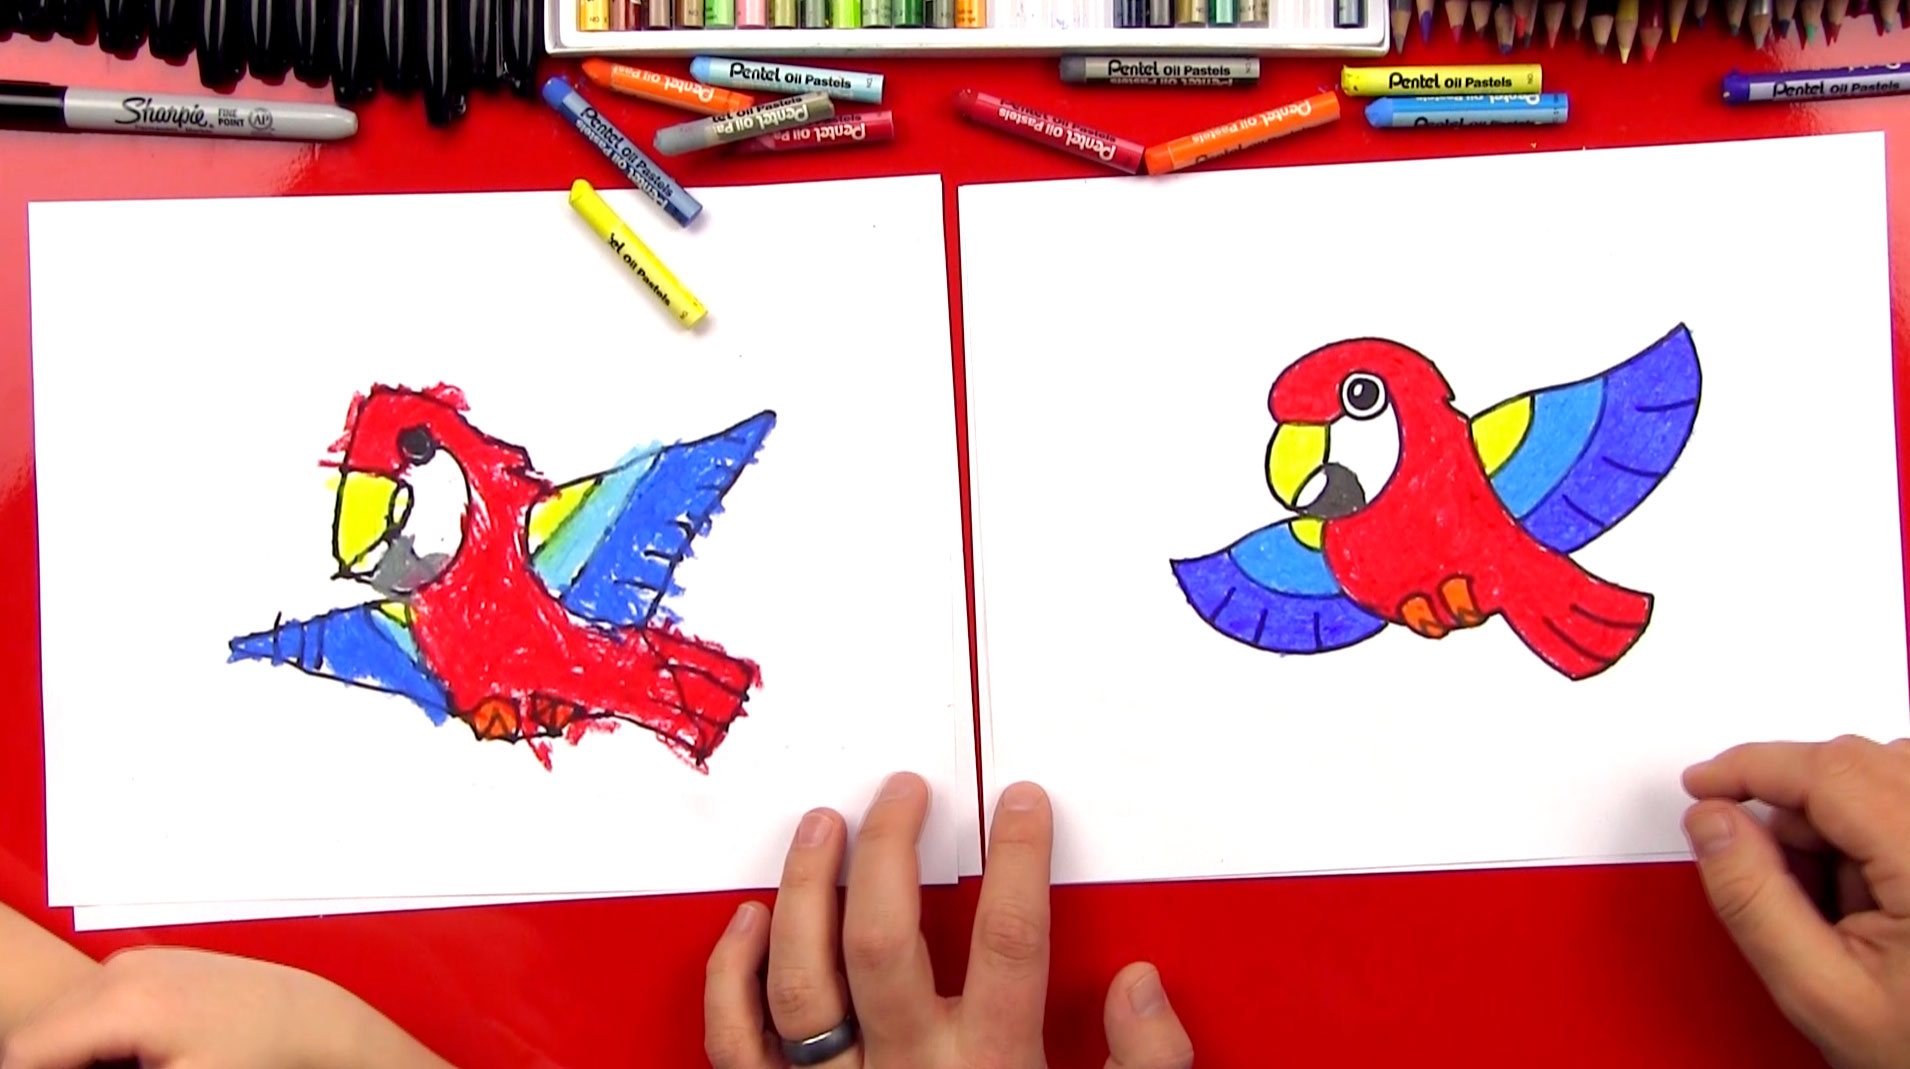 how to draw a parrot for kids